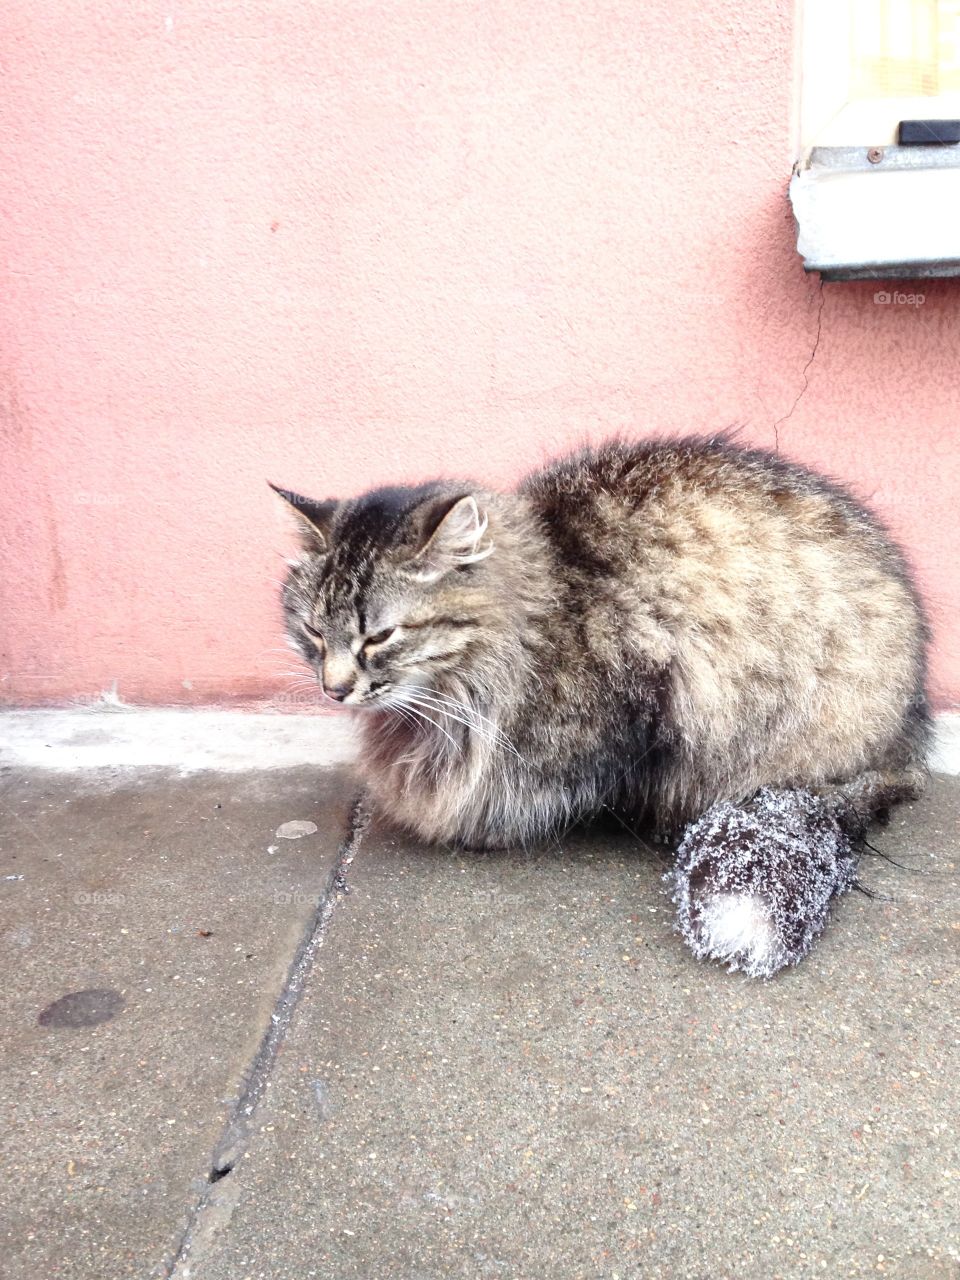 Homeless cat in the street, winter time 